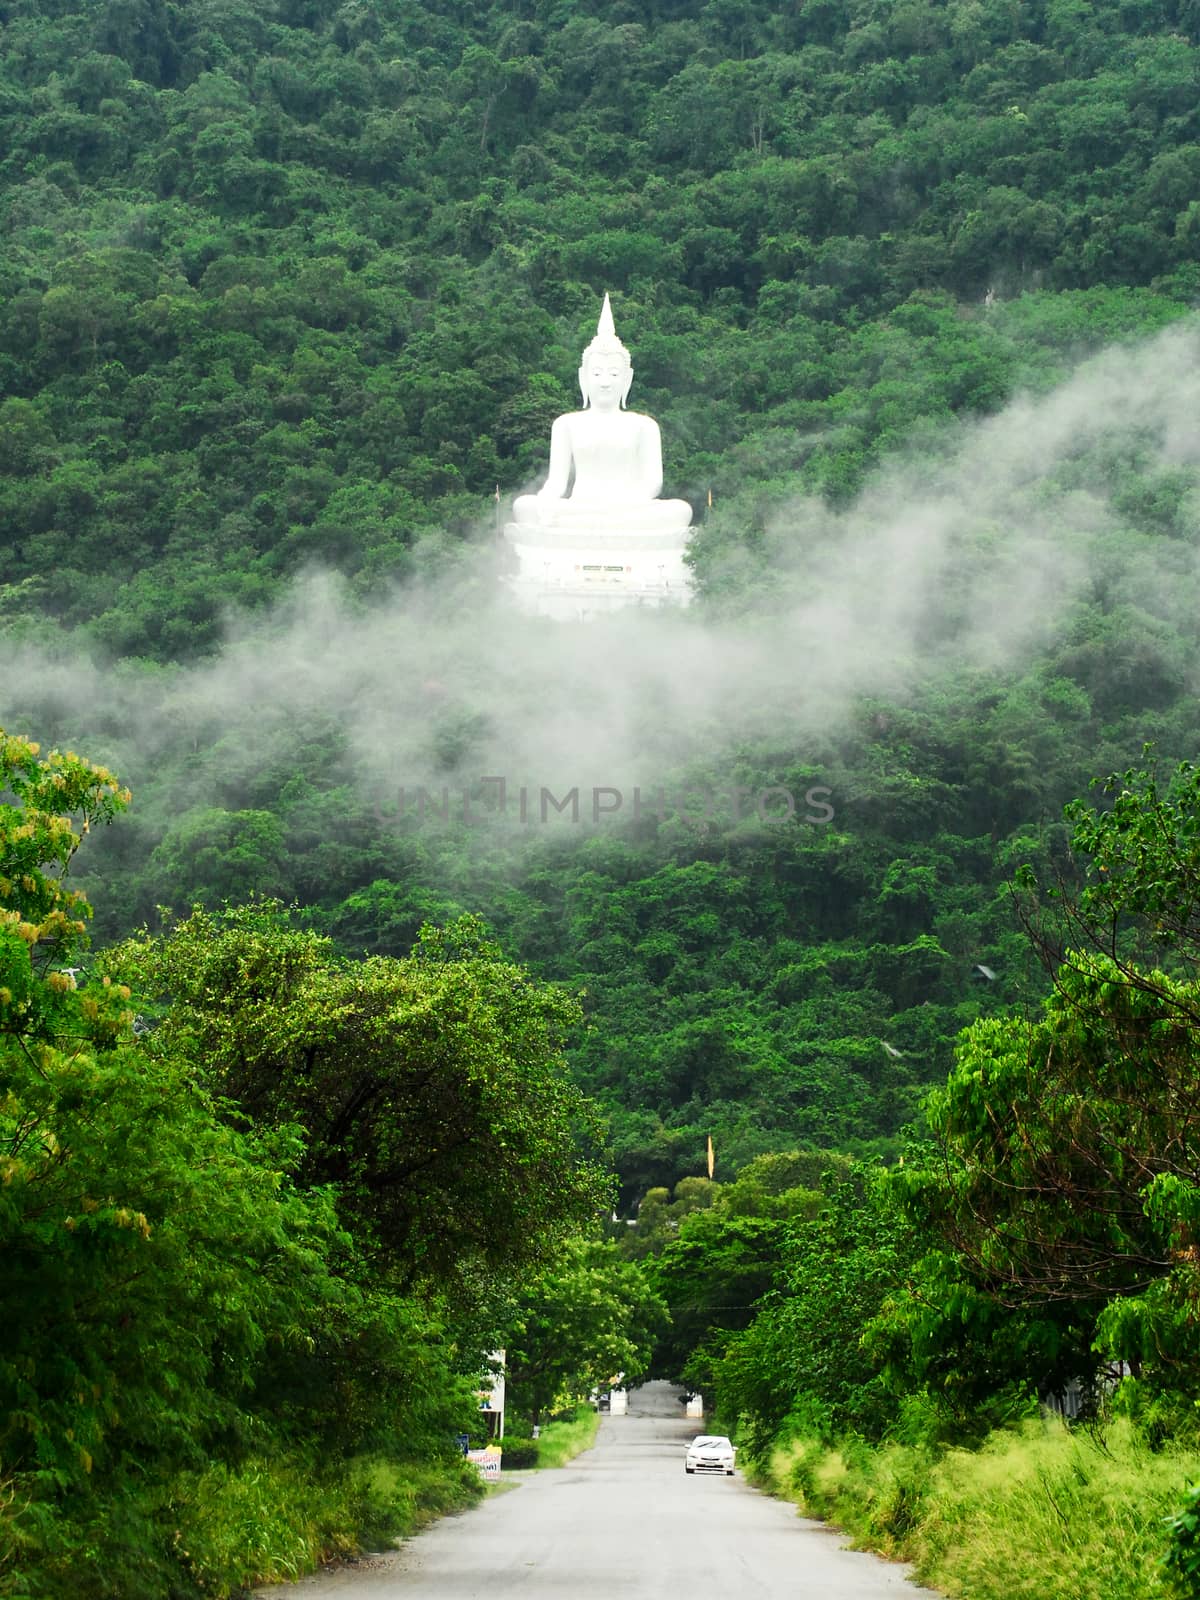 White Buddha Image on the mountain by prowpat